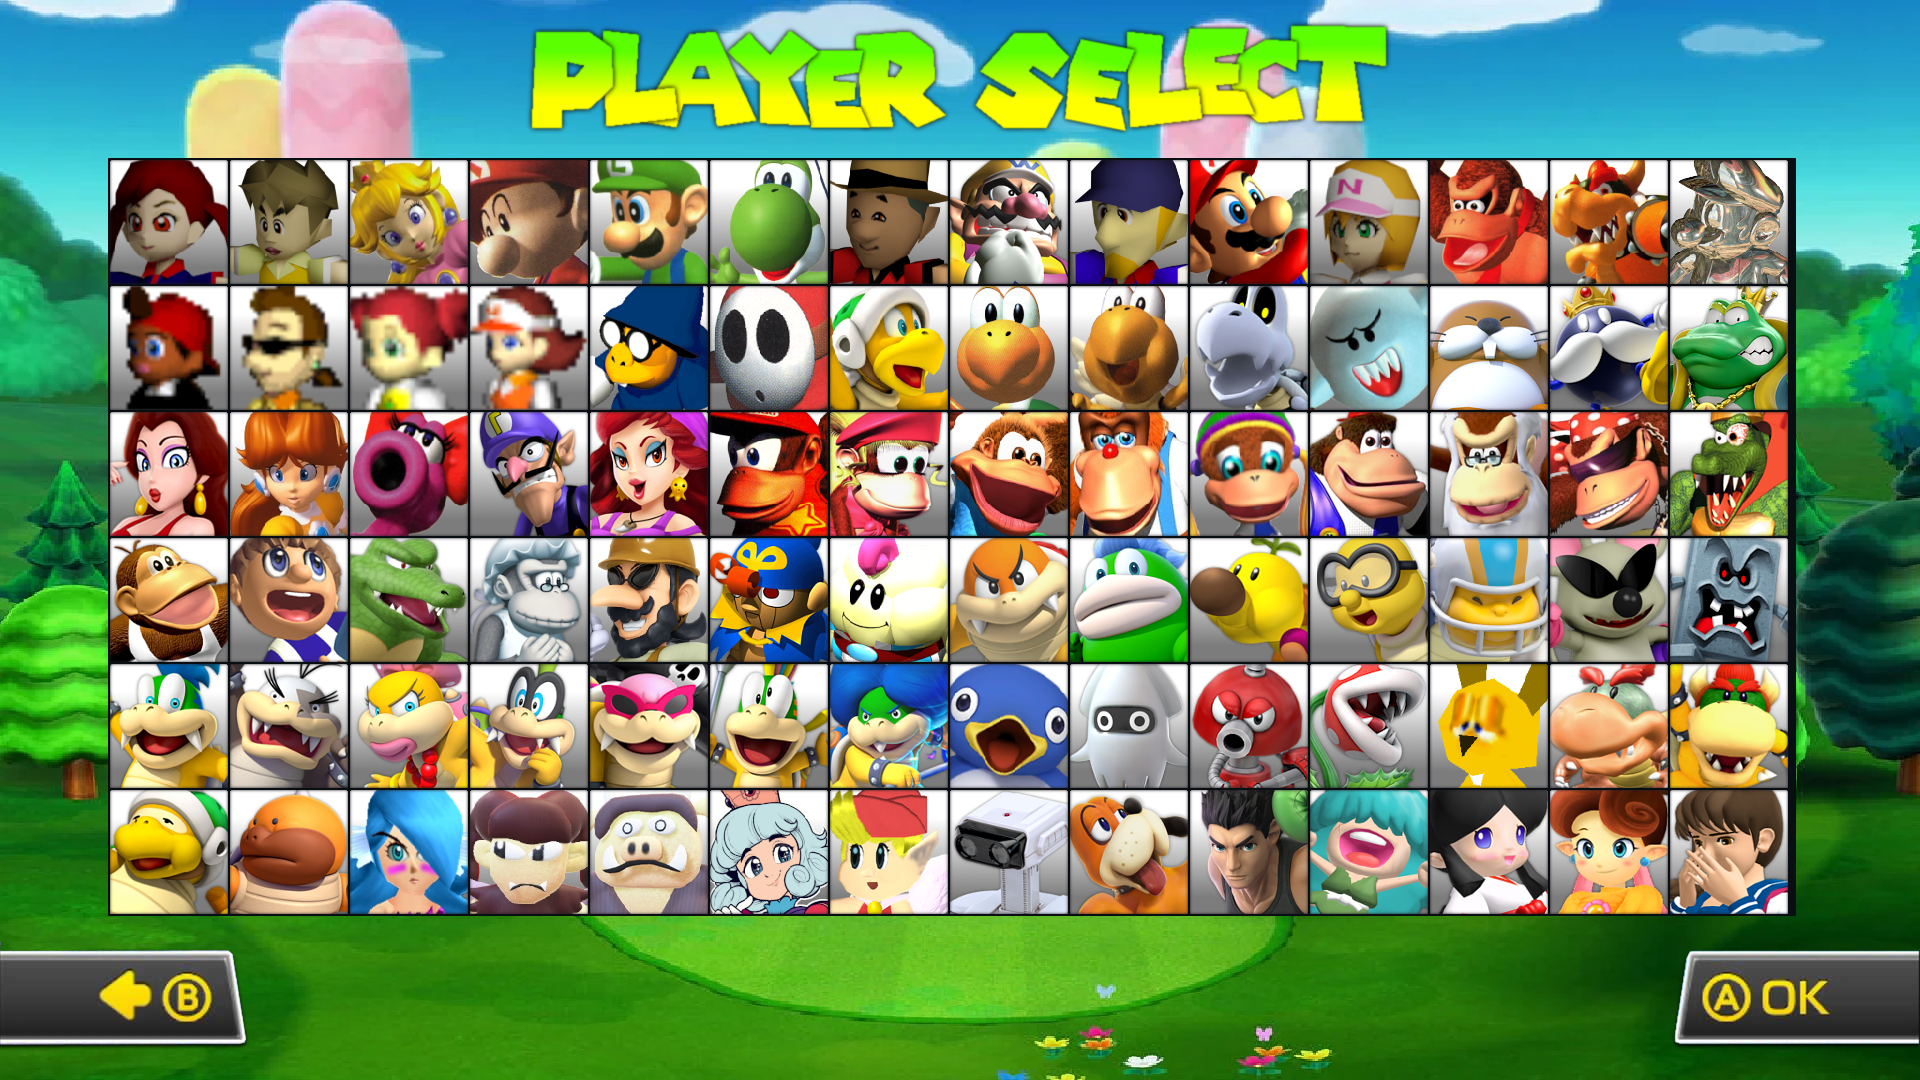 Pick one (extended roster characters) (closed)